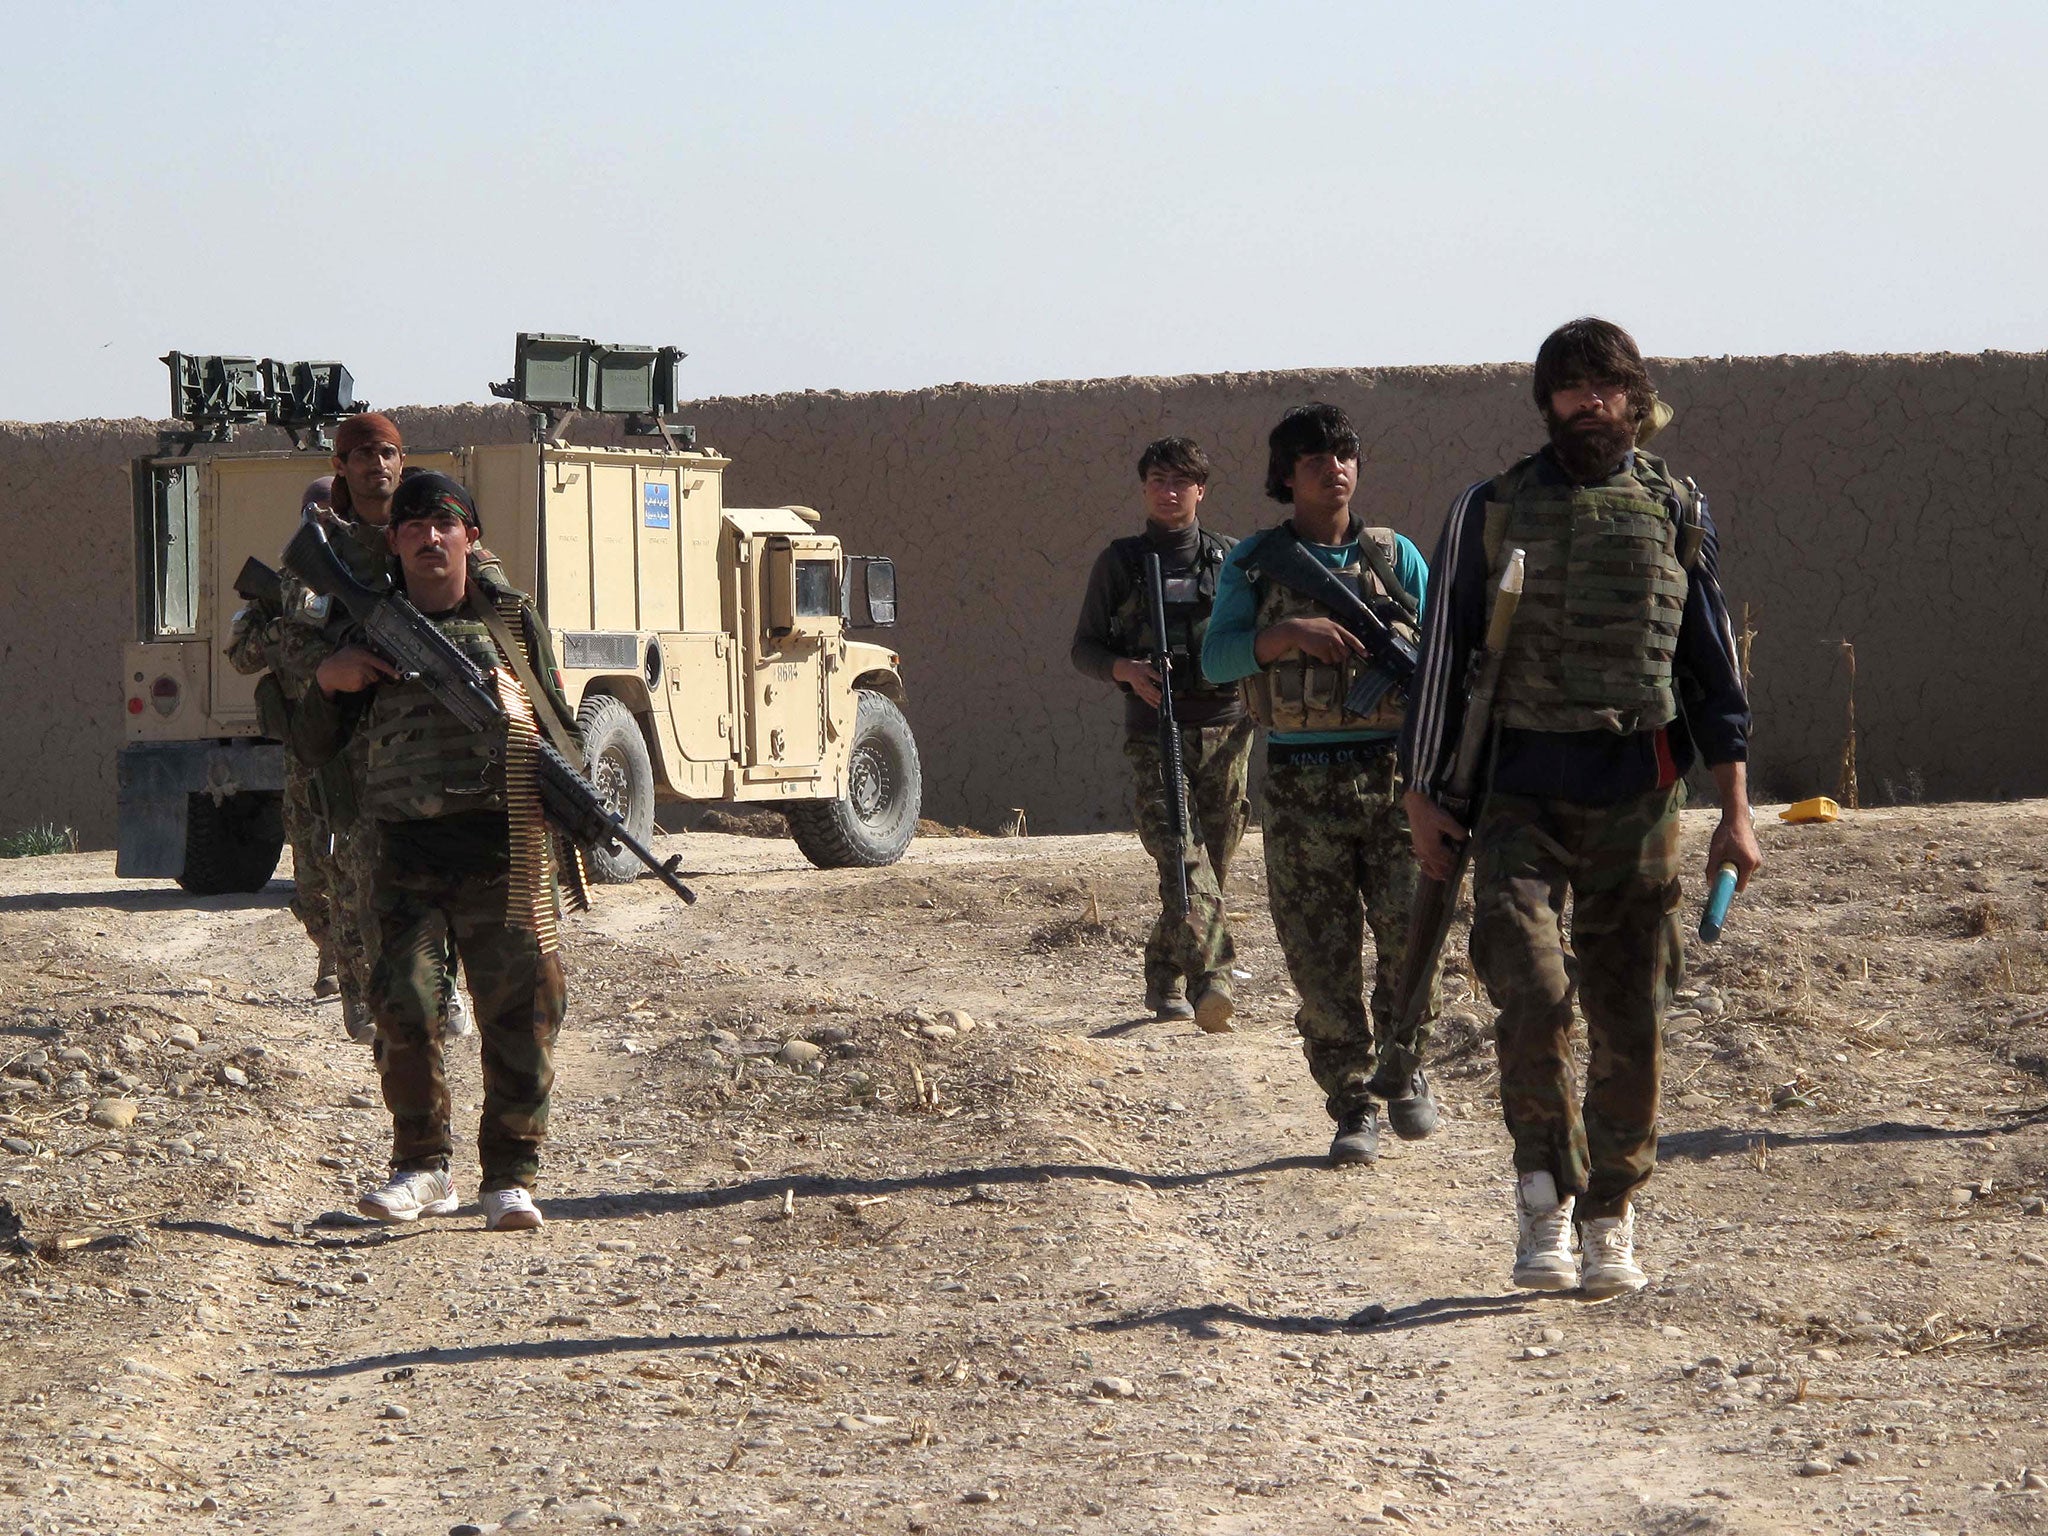 Afghan National Army (ANA) soldiers in Helmand Province